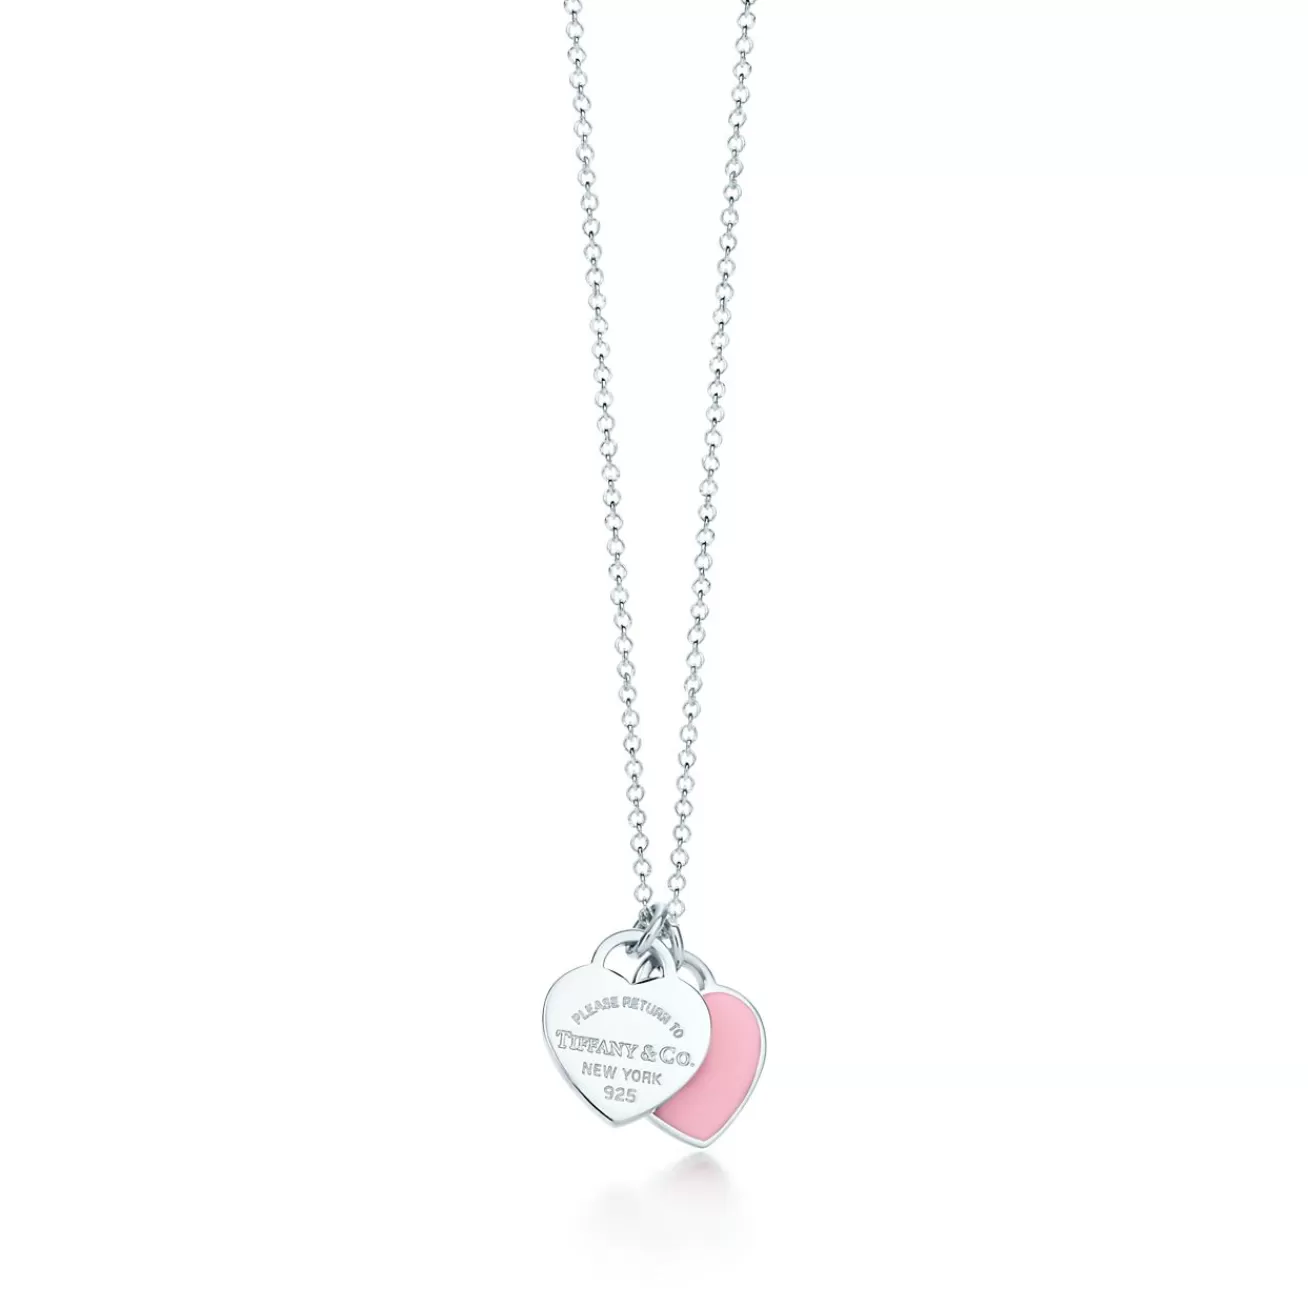 Tiffany & Co. Return to Tiffany™ mini double heart tag pendant in silver with pink enamel finish. | ^ Necklaces & Pendants | Gifts for Her